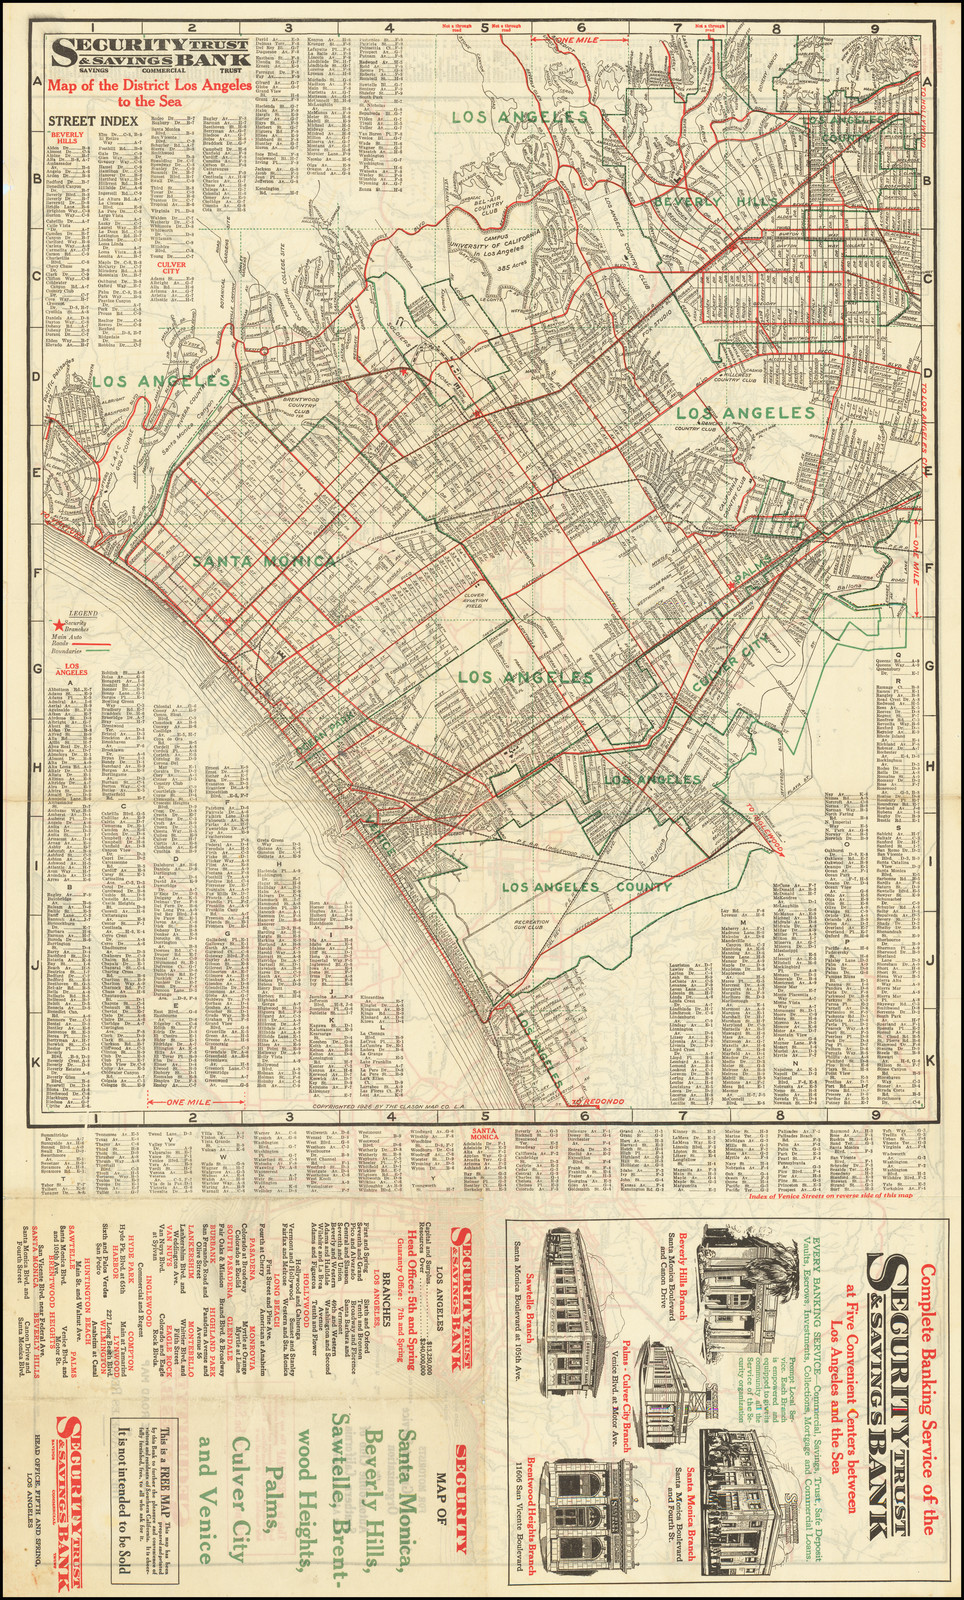 Automobile Road Map of The Los Angeles Basin (and) Map of the District of Los Angeles to the Sea